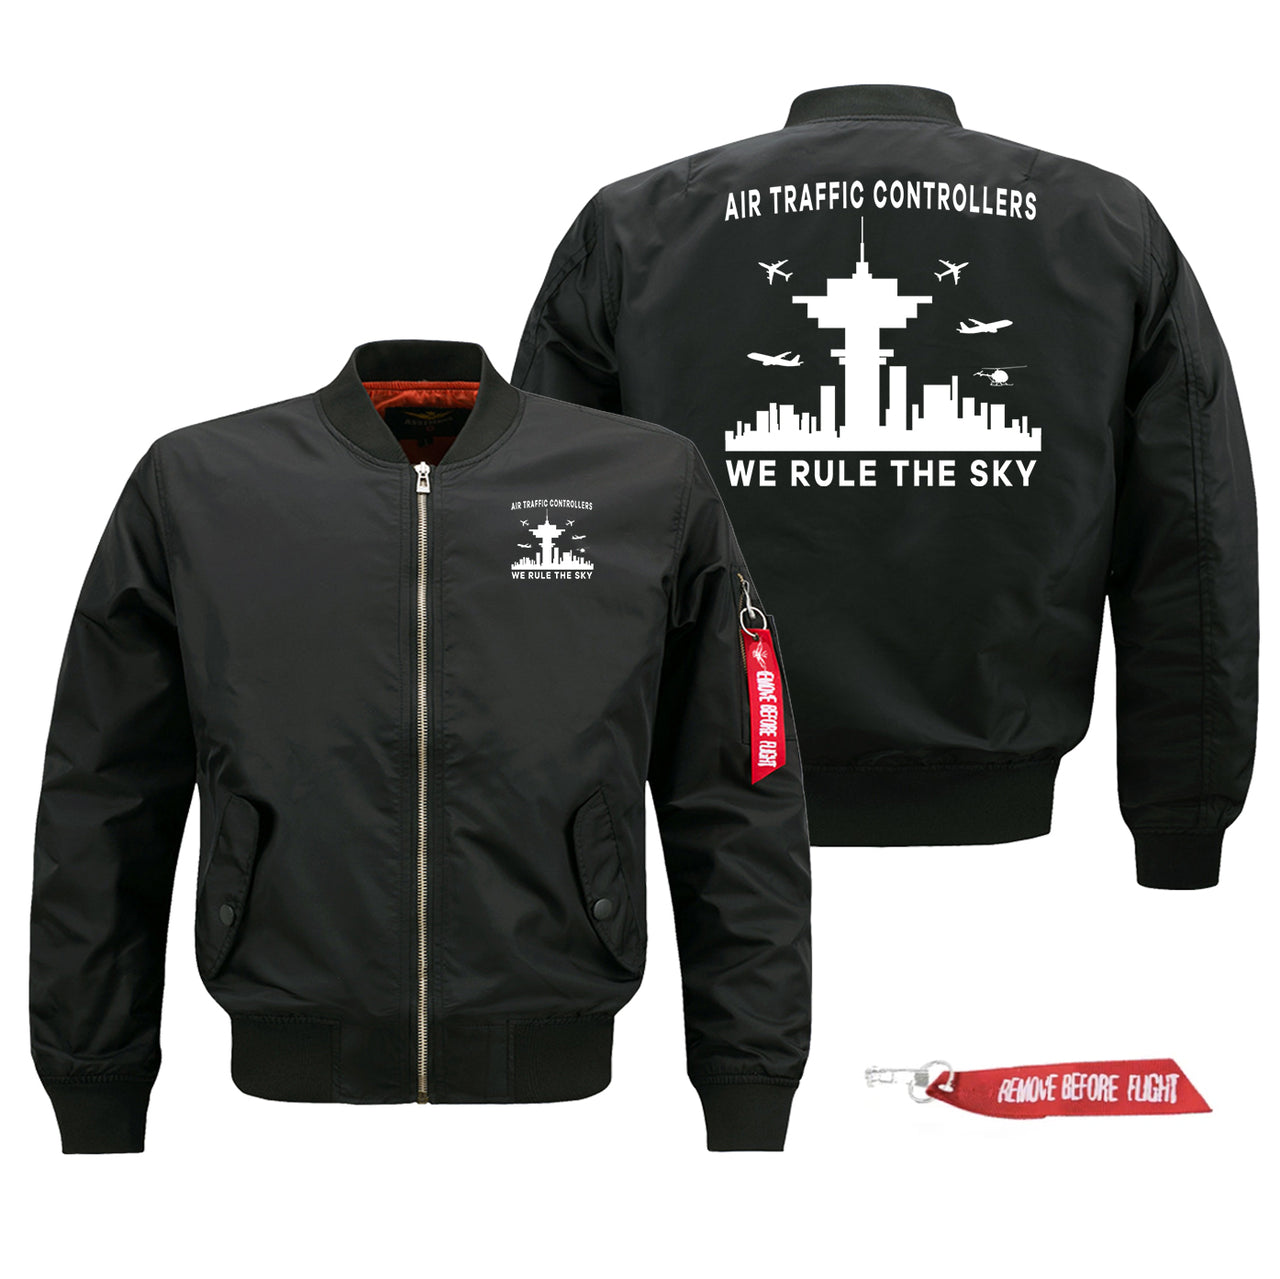 Air Traffic Controllers - We Rule The Sky Designed Pilot Jackets (Customizable)